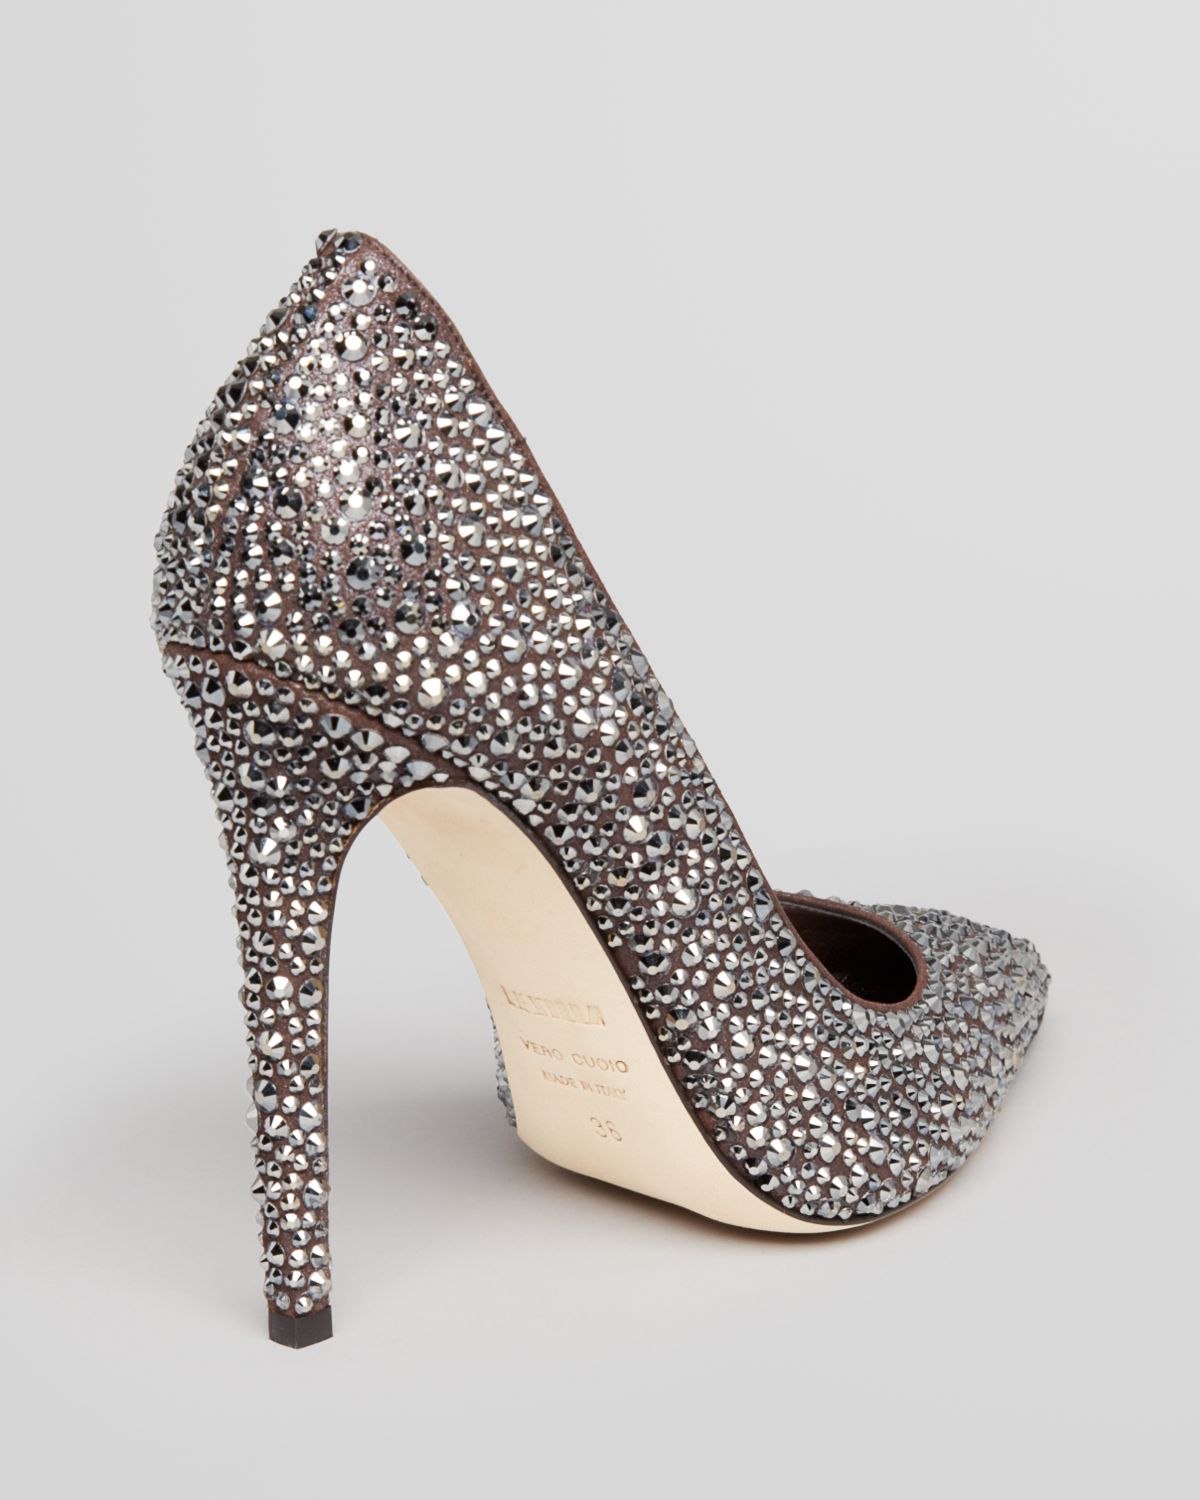 Lyst - Le Silla Pointed Toe Pumps Crystal Studded High Heel in Metallic